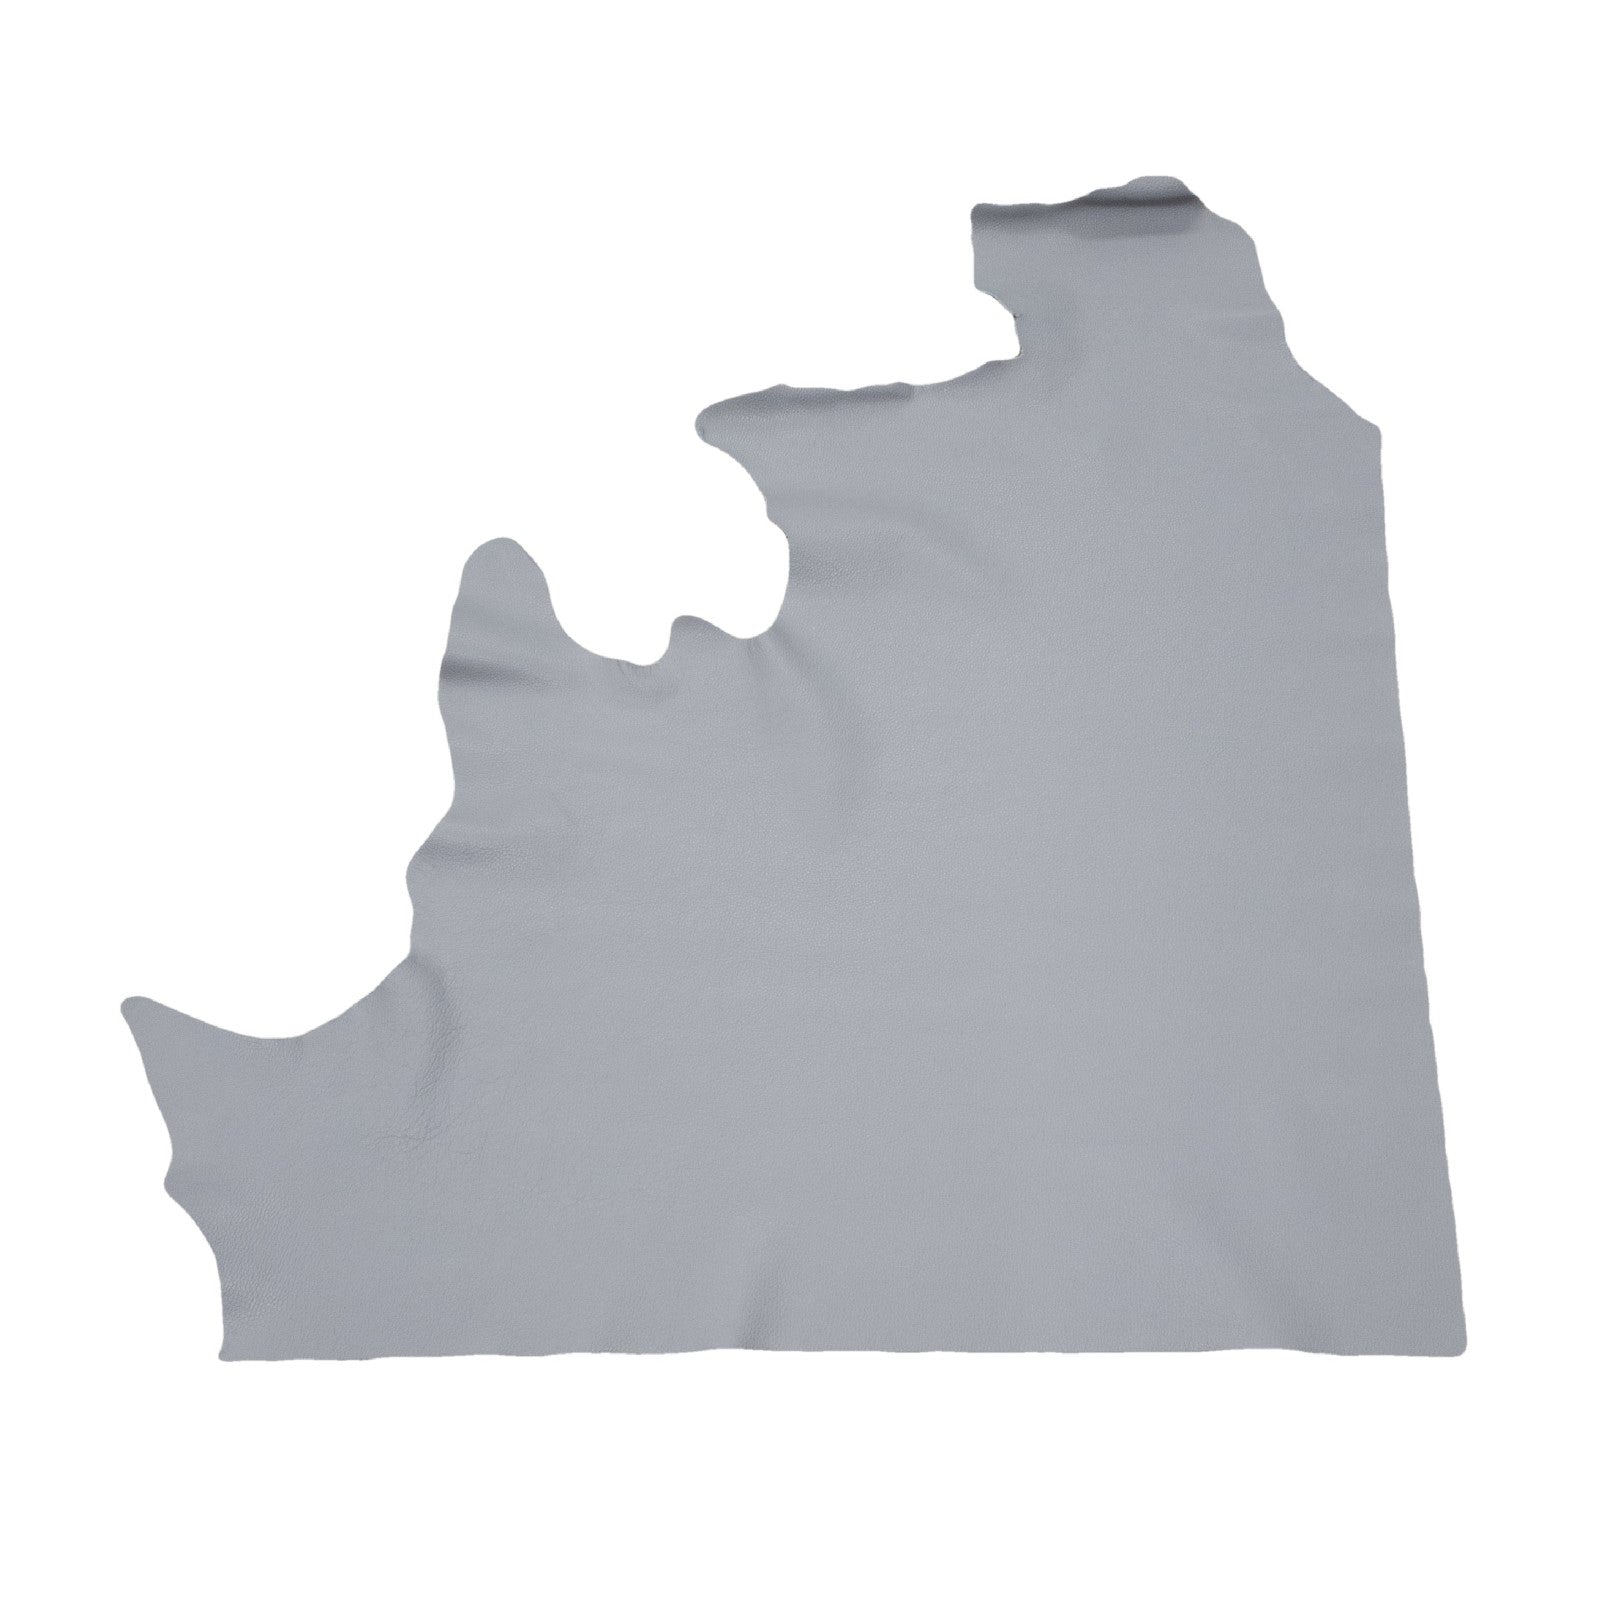 Pittsburgh Steel Gray Tried n True 3-4 oz Leather Cow Hides, Top Piece / 6.5-7.5 Square Foot | The Leather Guy